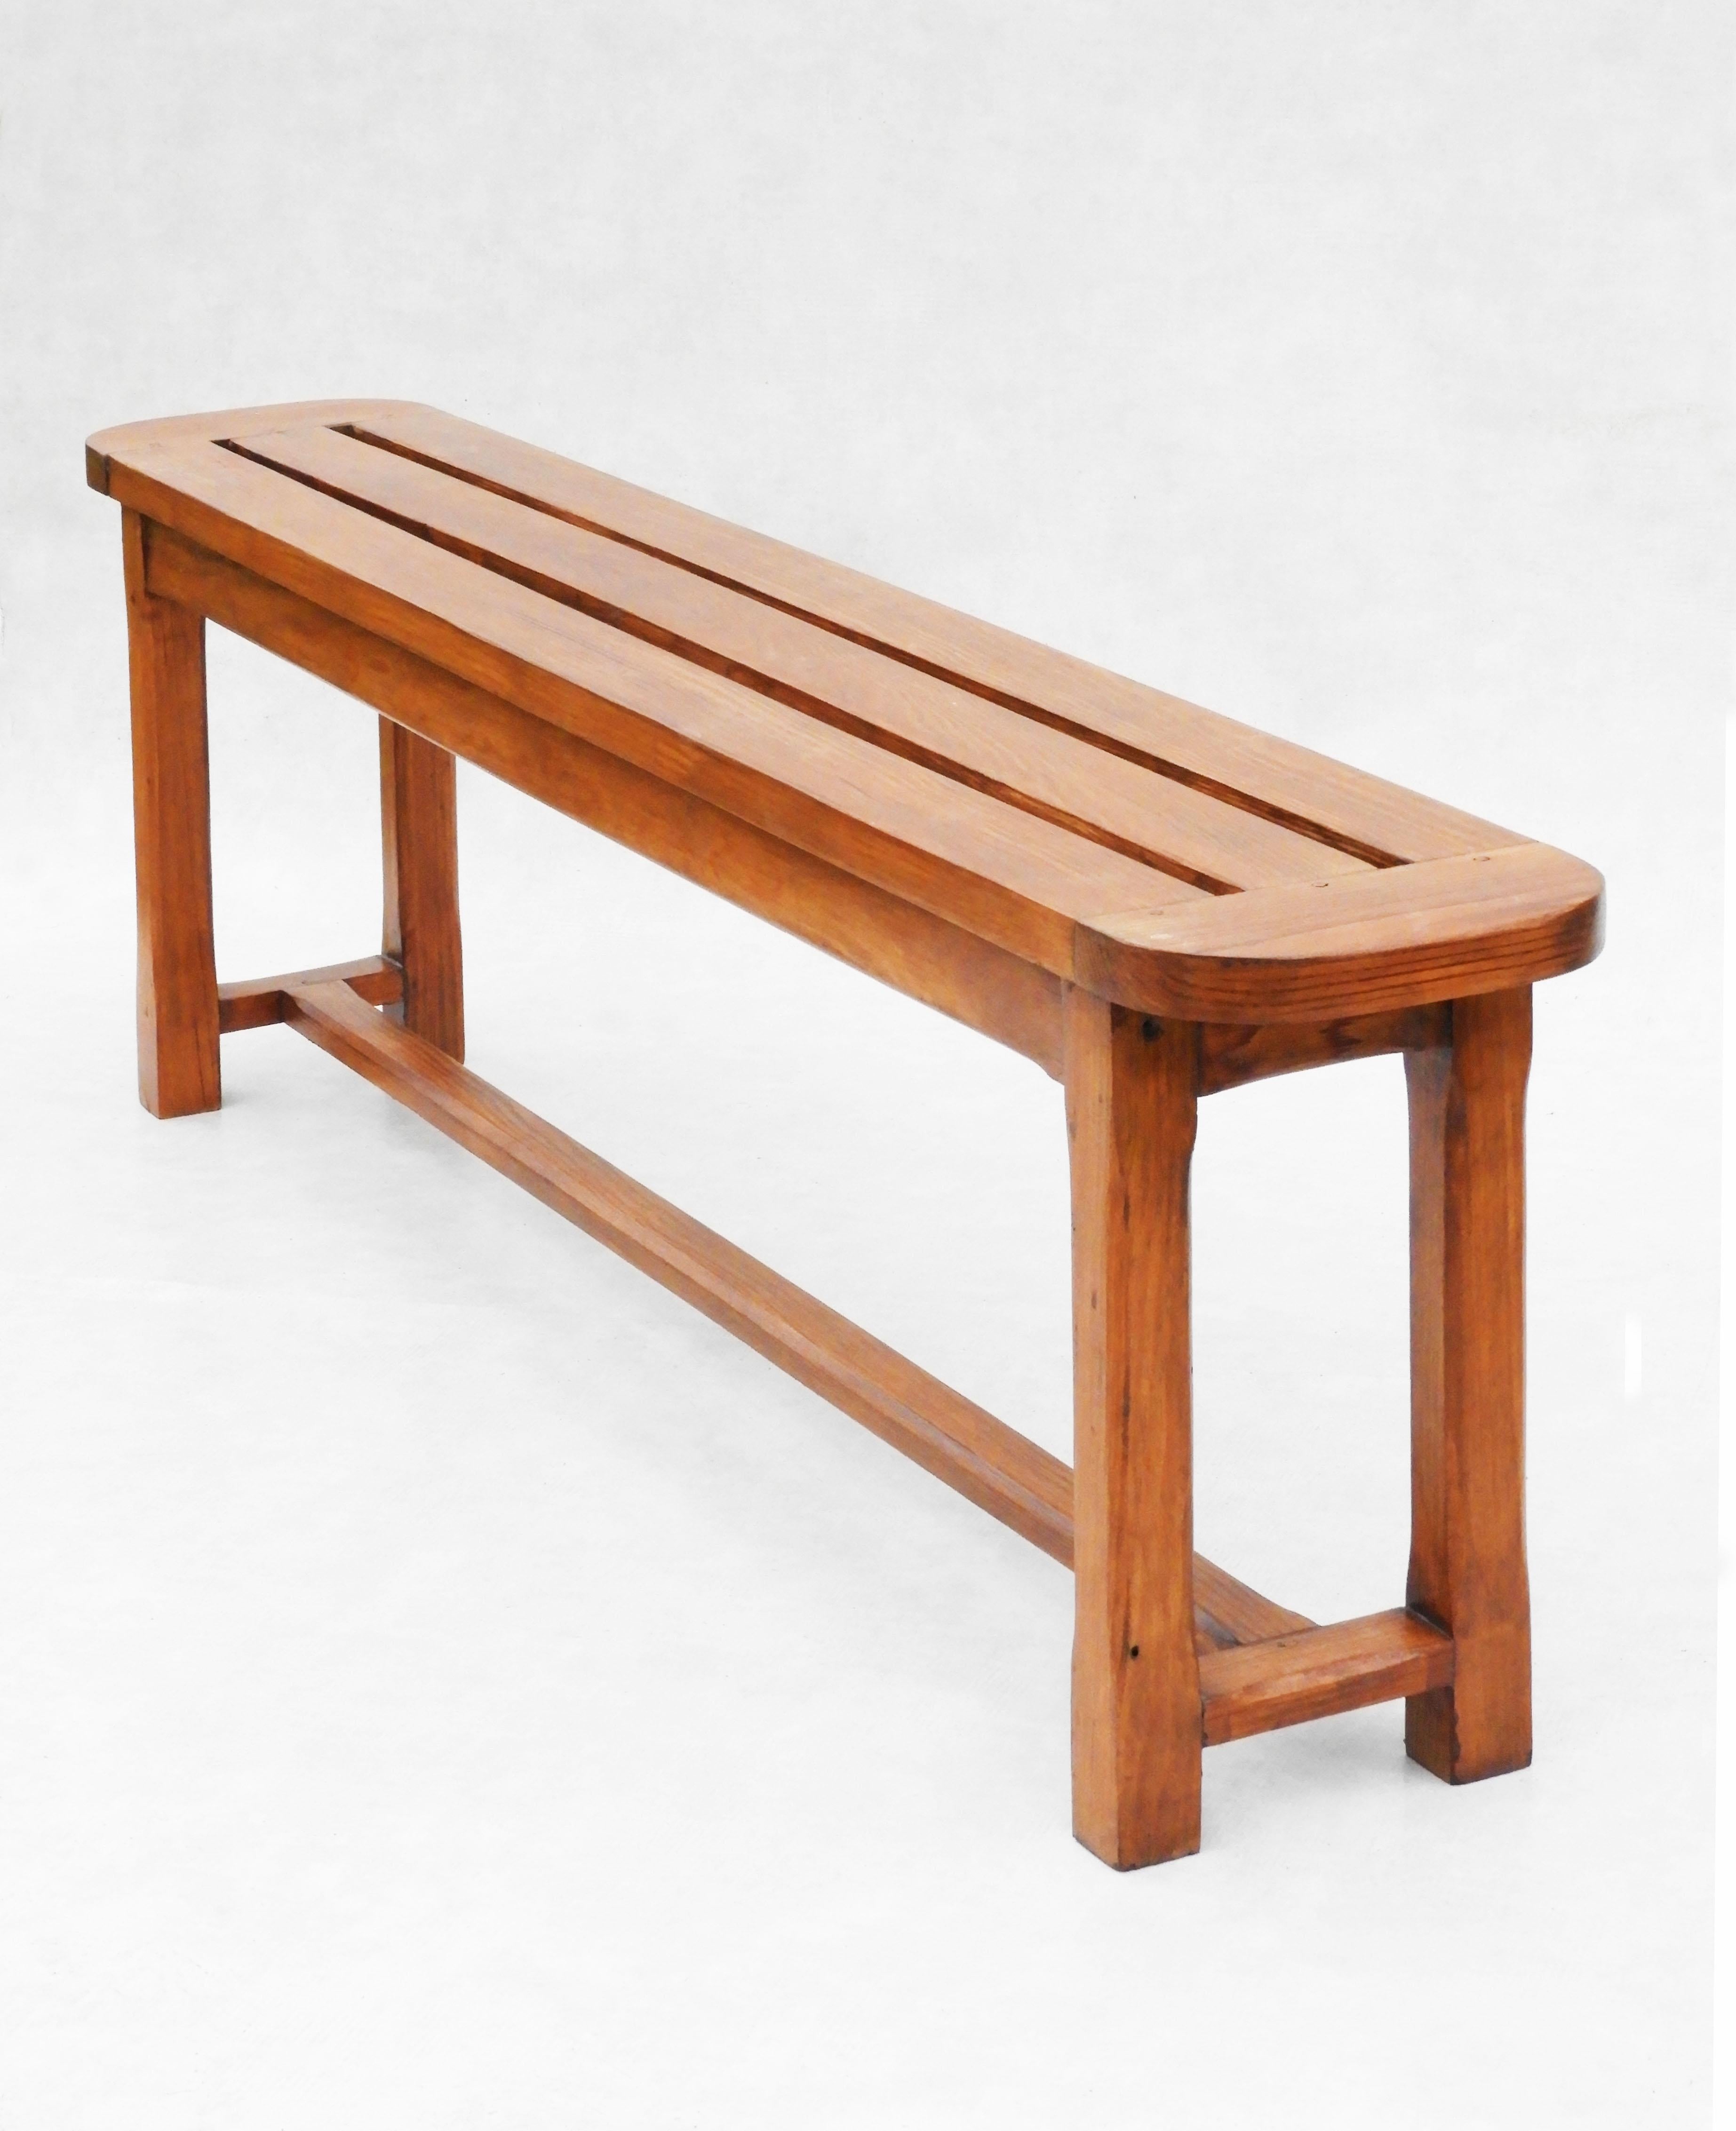 Vintage French Provincial Slatted Pine Bench Seating In Good Condition For Sale In Trensacq, FR